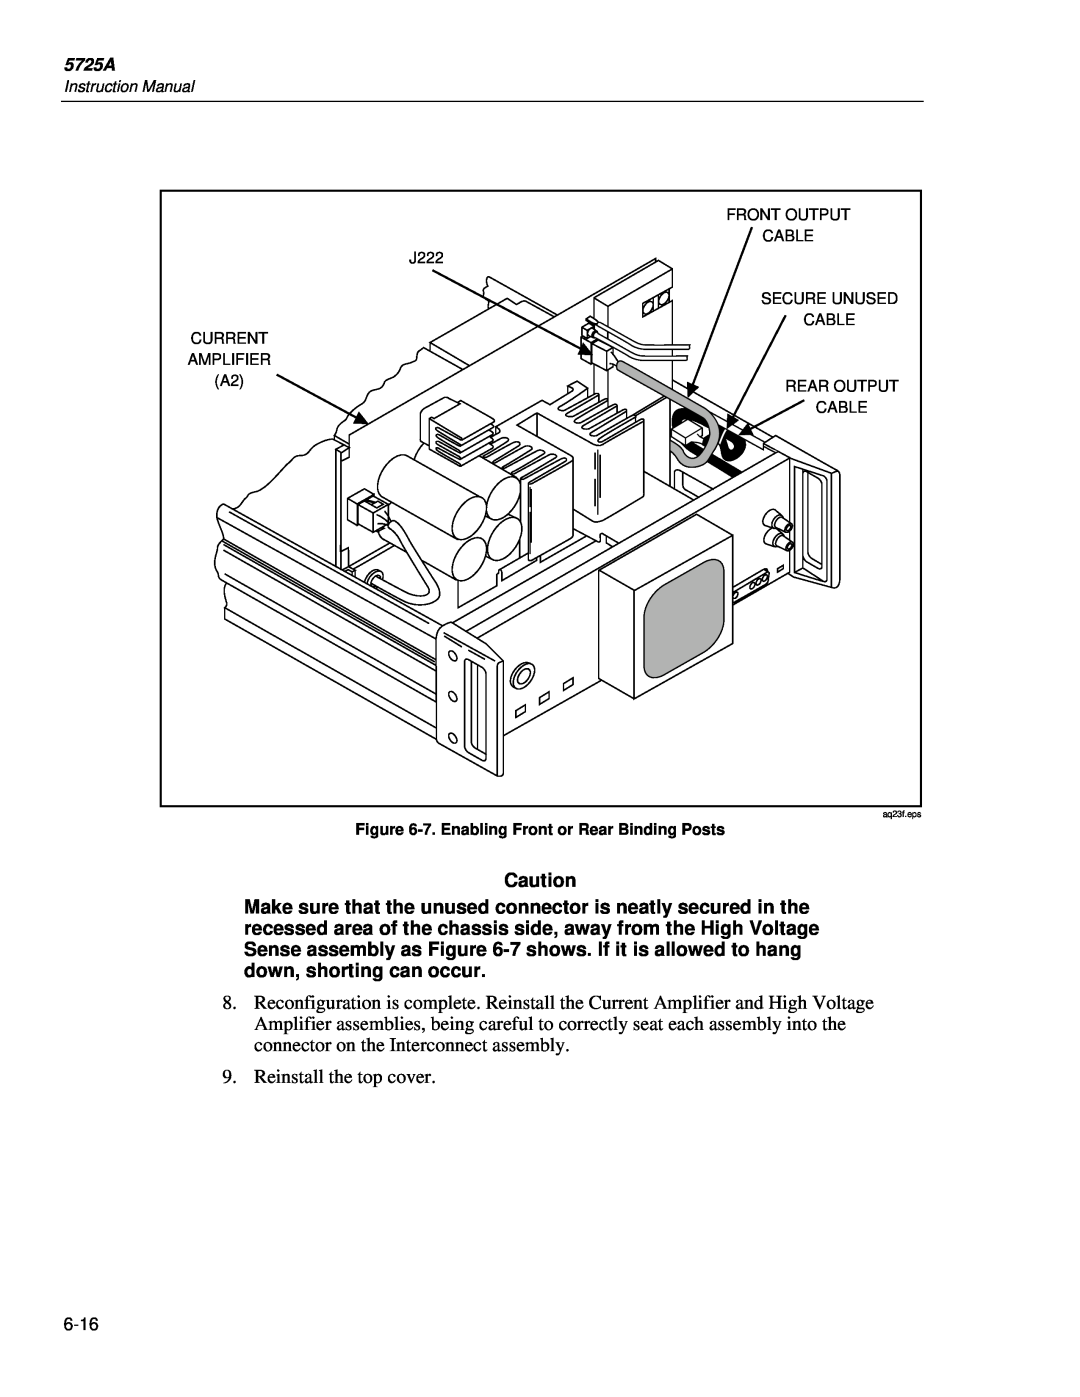 Fluke 5725A instruction manual Reinstall the top cover 